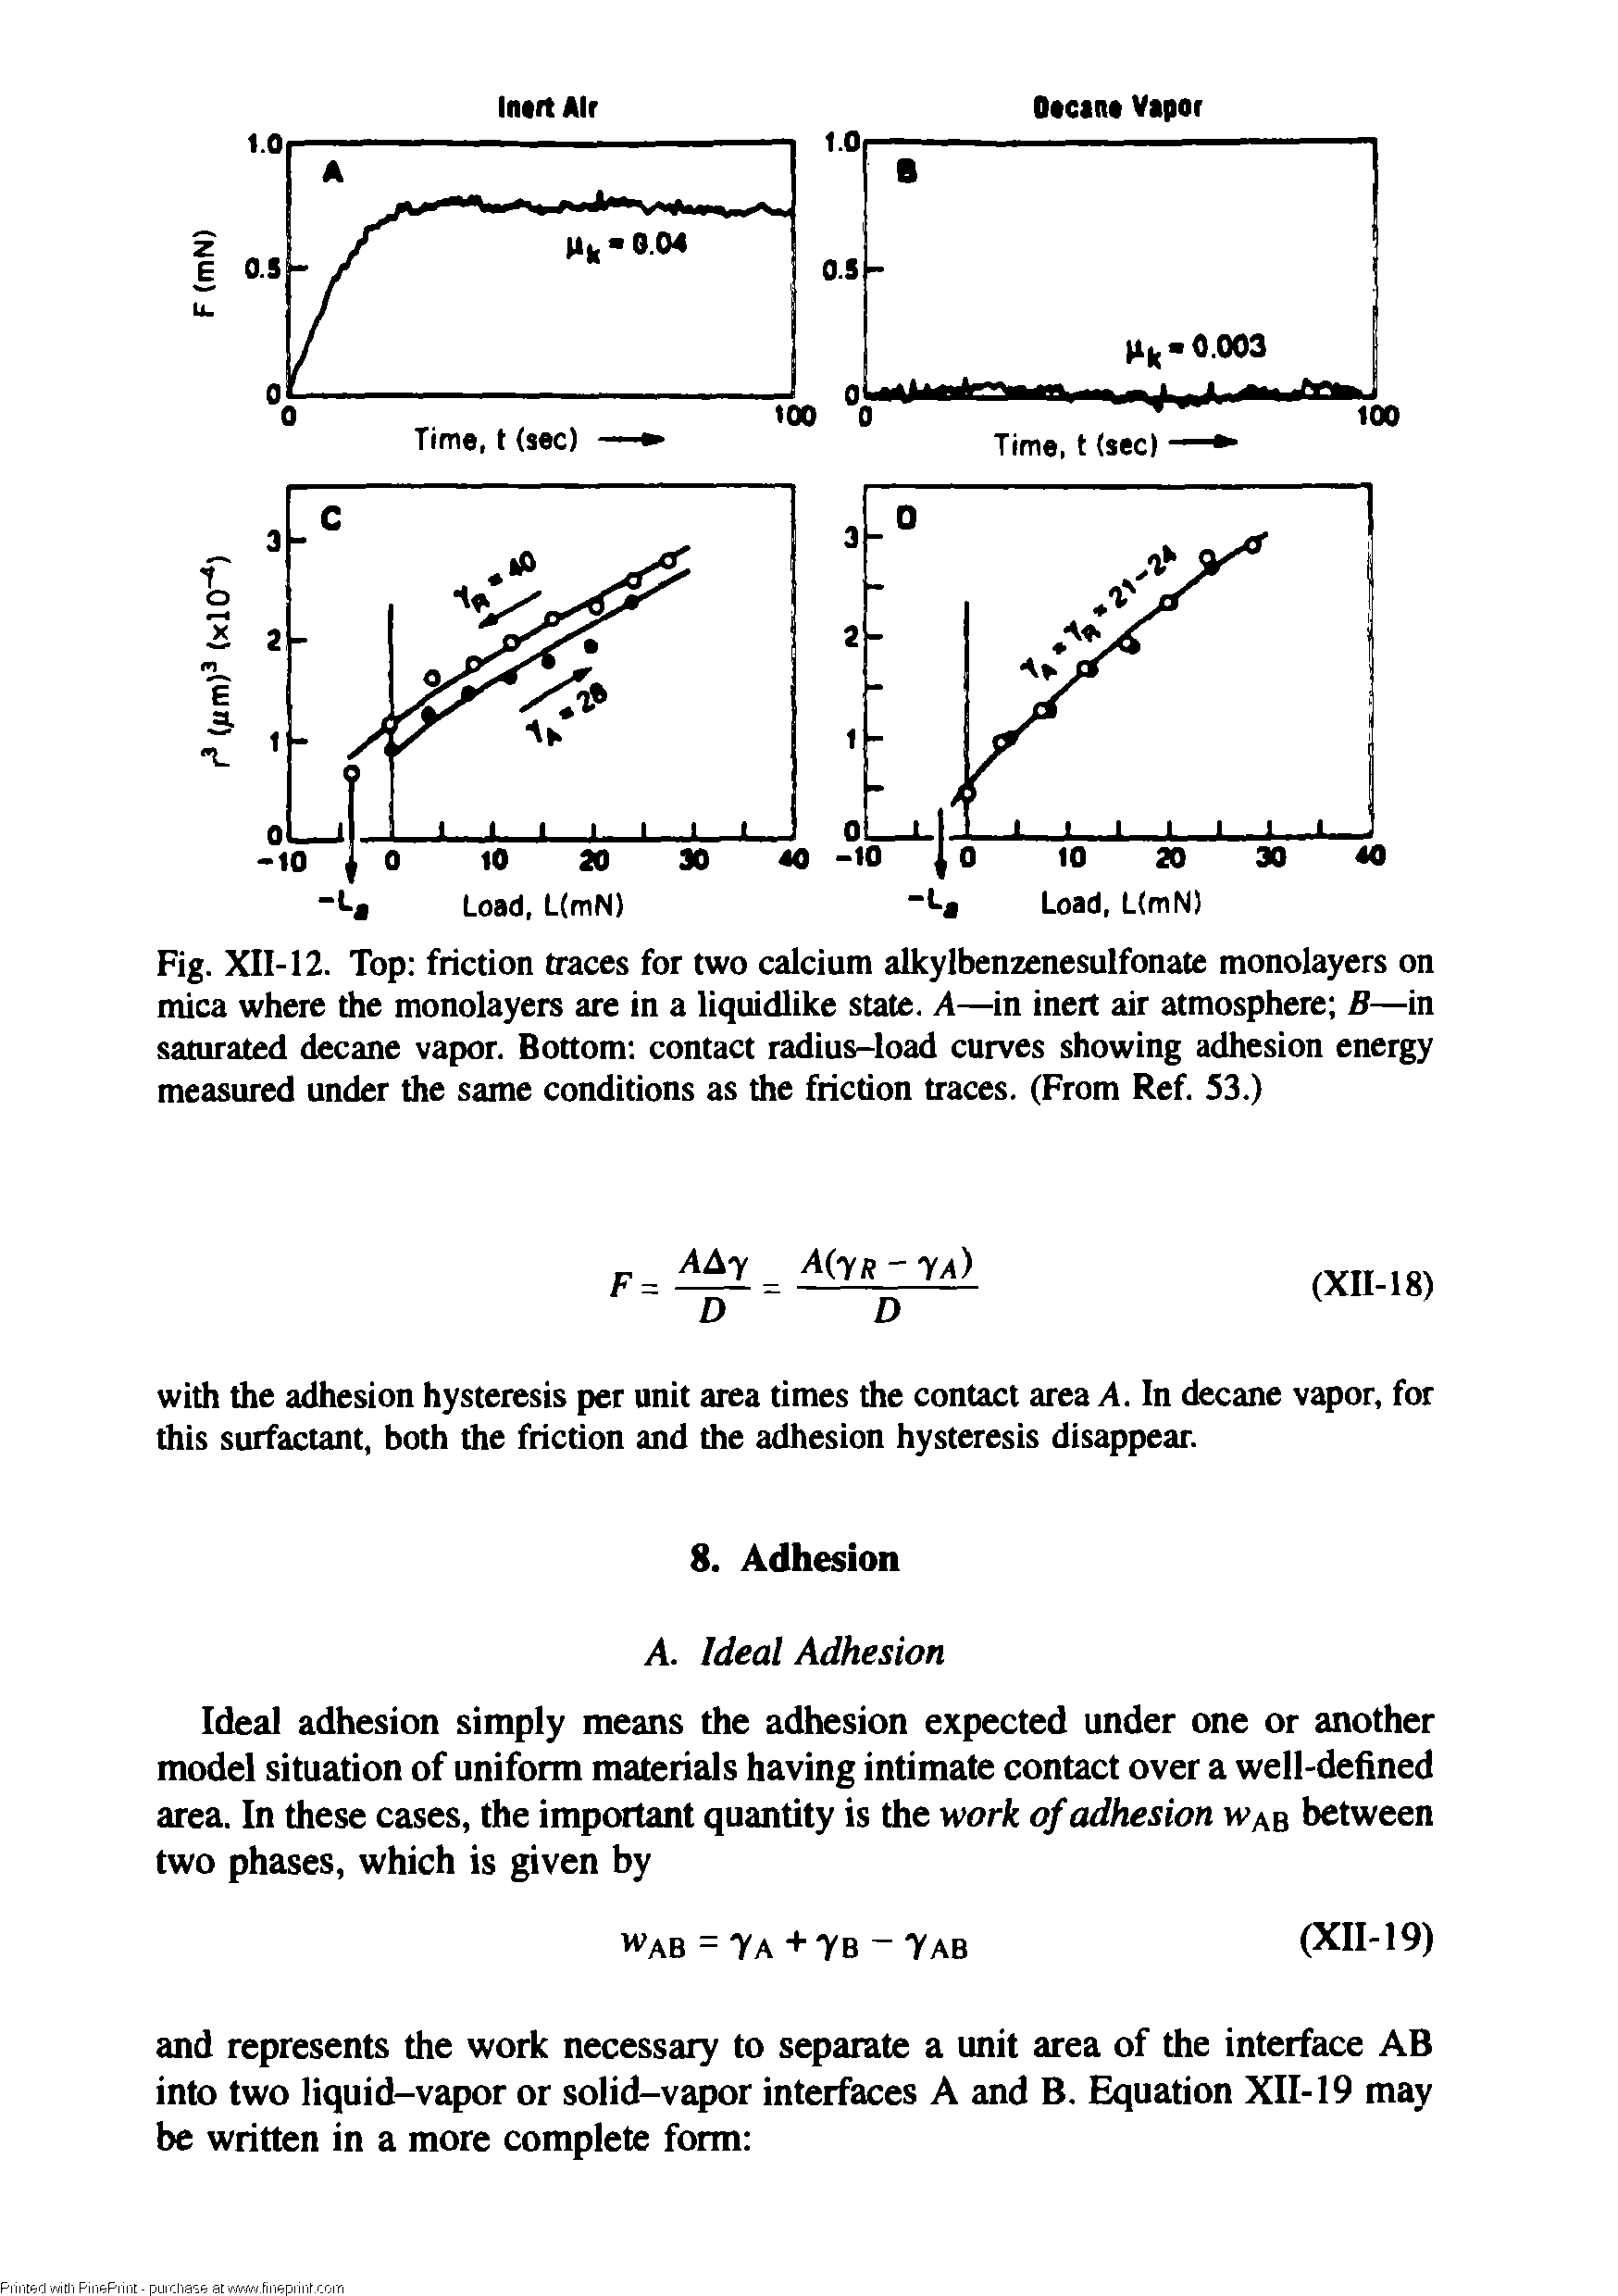 Fig. XII-12. Top friction traces for two calcium alkylbenzenesulfonate monolayers on mica where the monolayers are in a liquidlike state. A—in inert air atmosphere B—in saturated decane vapor. Bottom contact radius-load curves showing adhesion energy measured under the same conditions as the friction traces. (From Ref. 53.)...